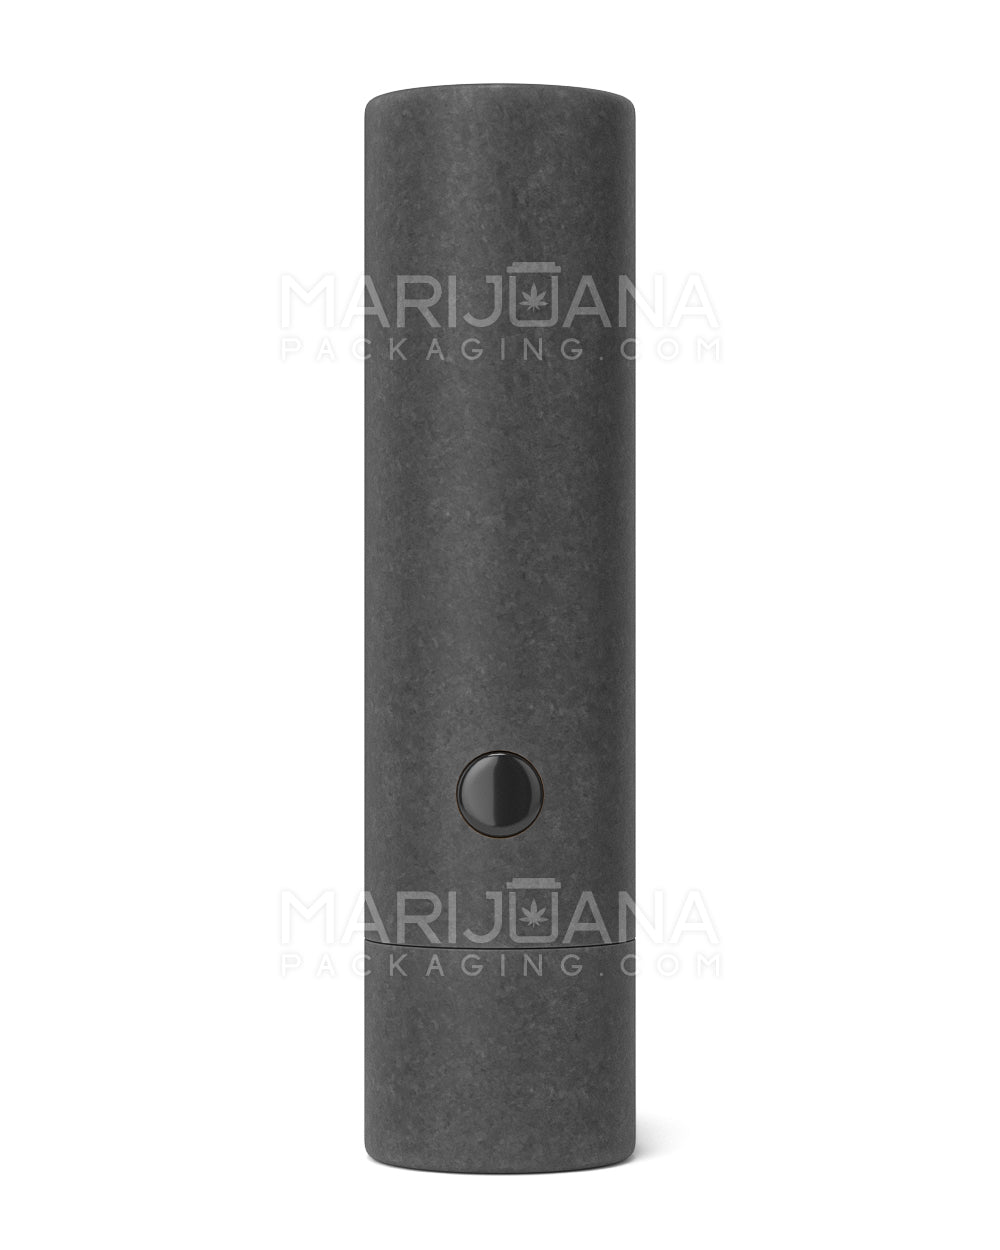 Child Resistant & Sustainable | 100% Recyclable Cardboard Vape Cartridge Tube w/ Press Button | 95mm - Black - 100 Count - 1